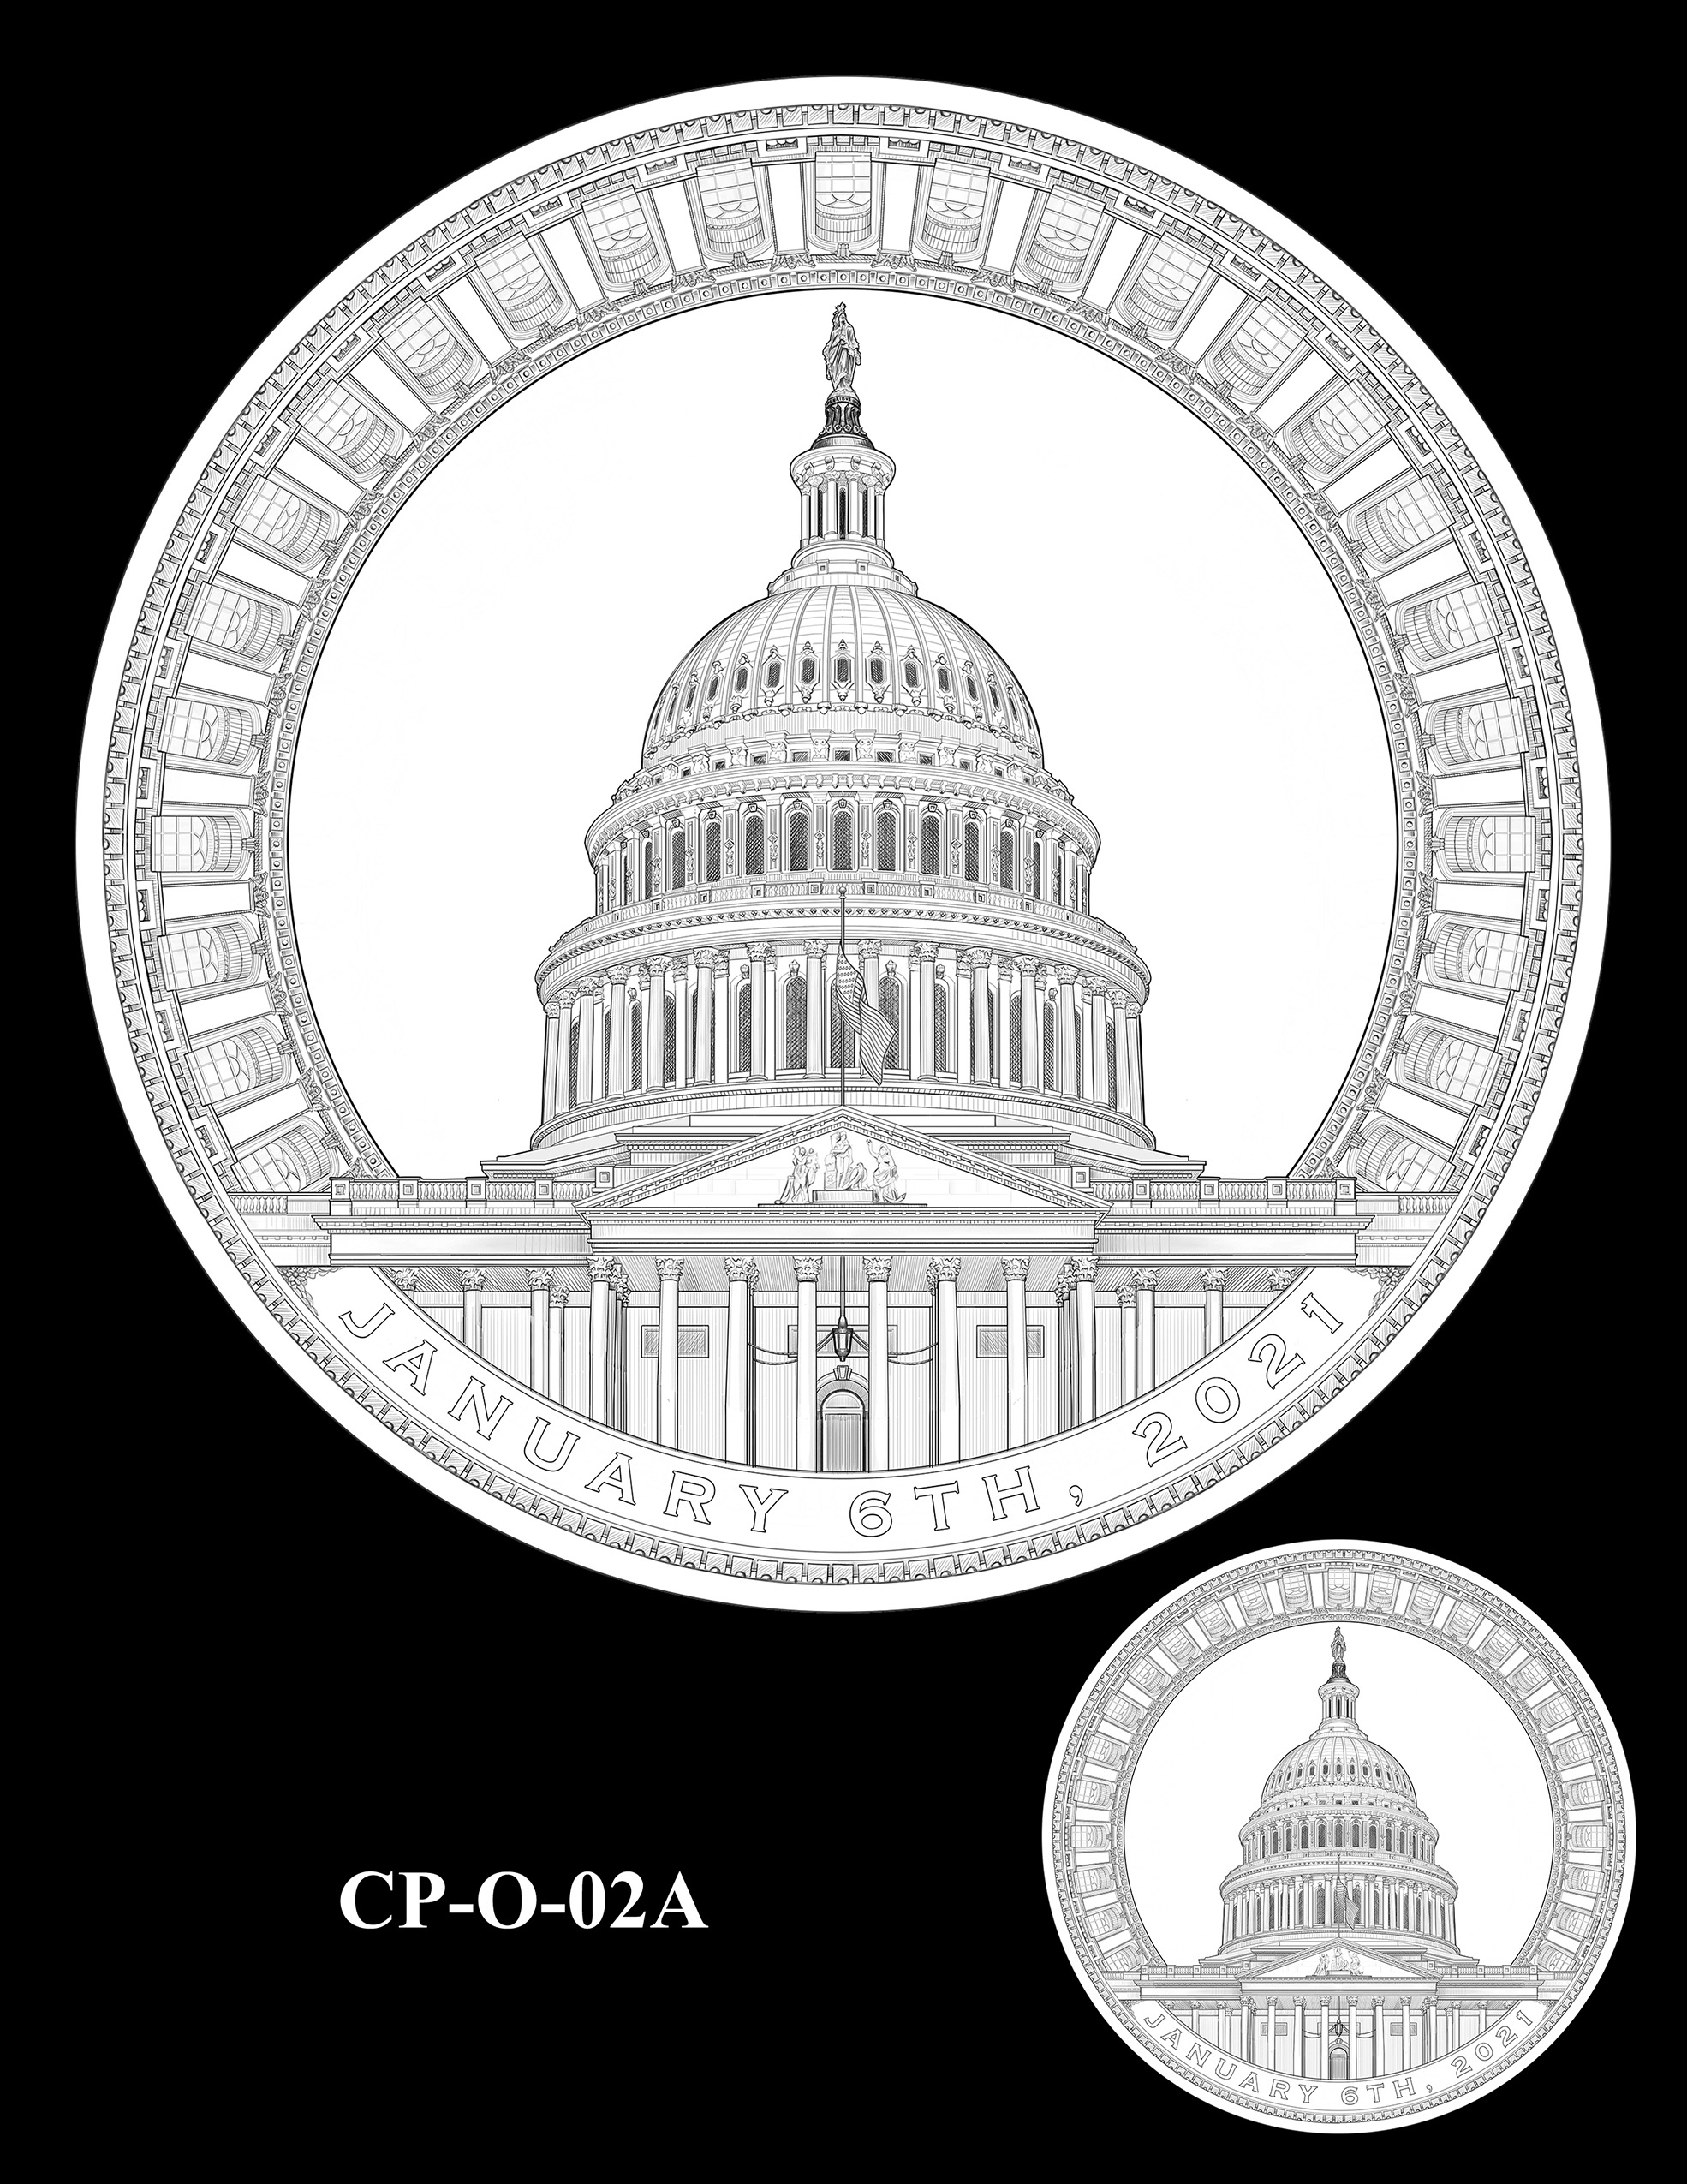 CP-O-02A -- Congressional Gold Medal for Those Who Protected the U.S. Capitol on January 6th 2021